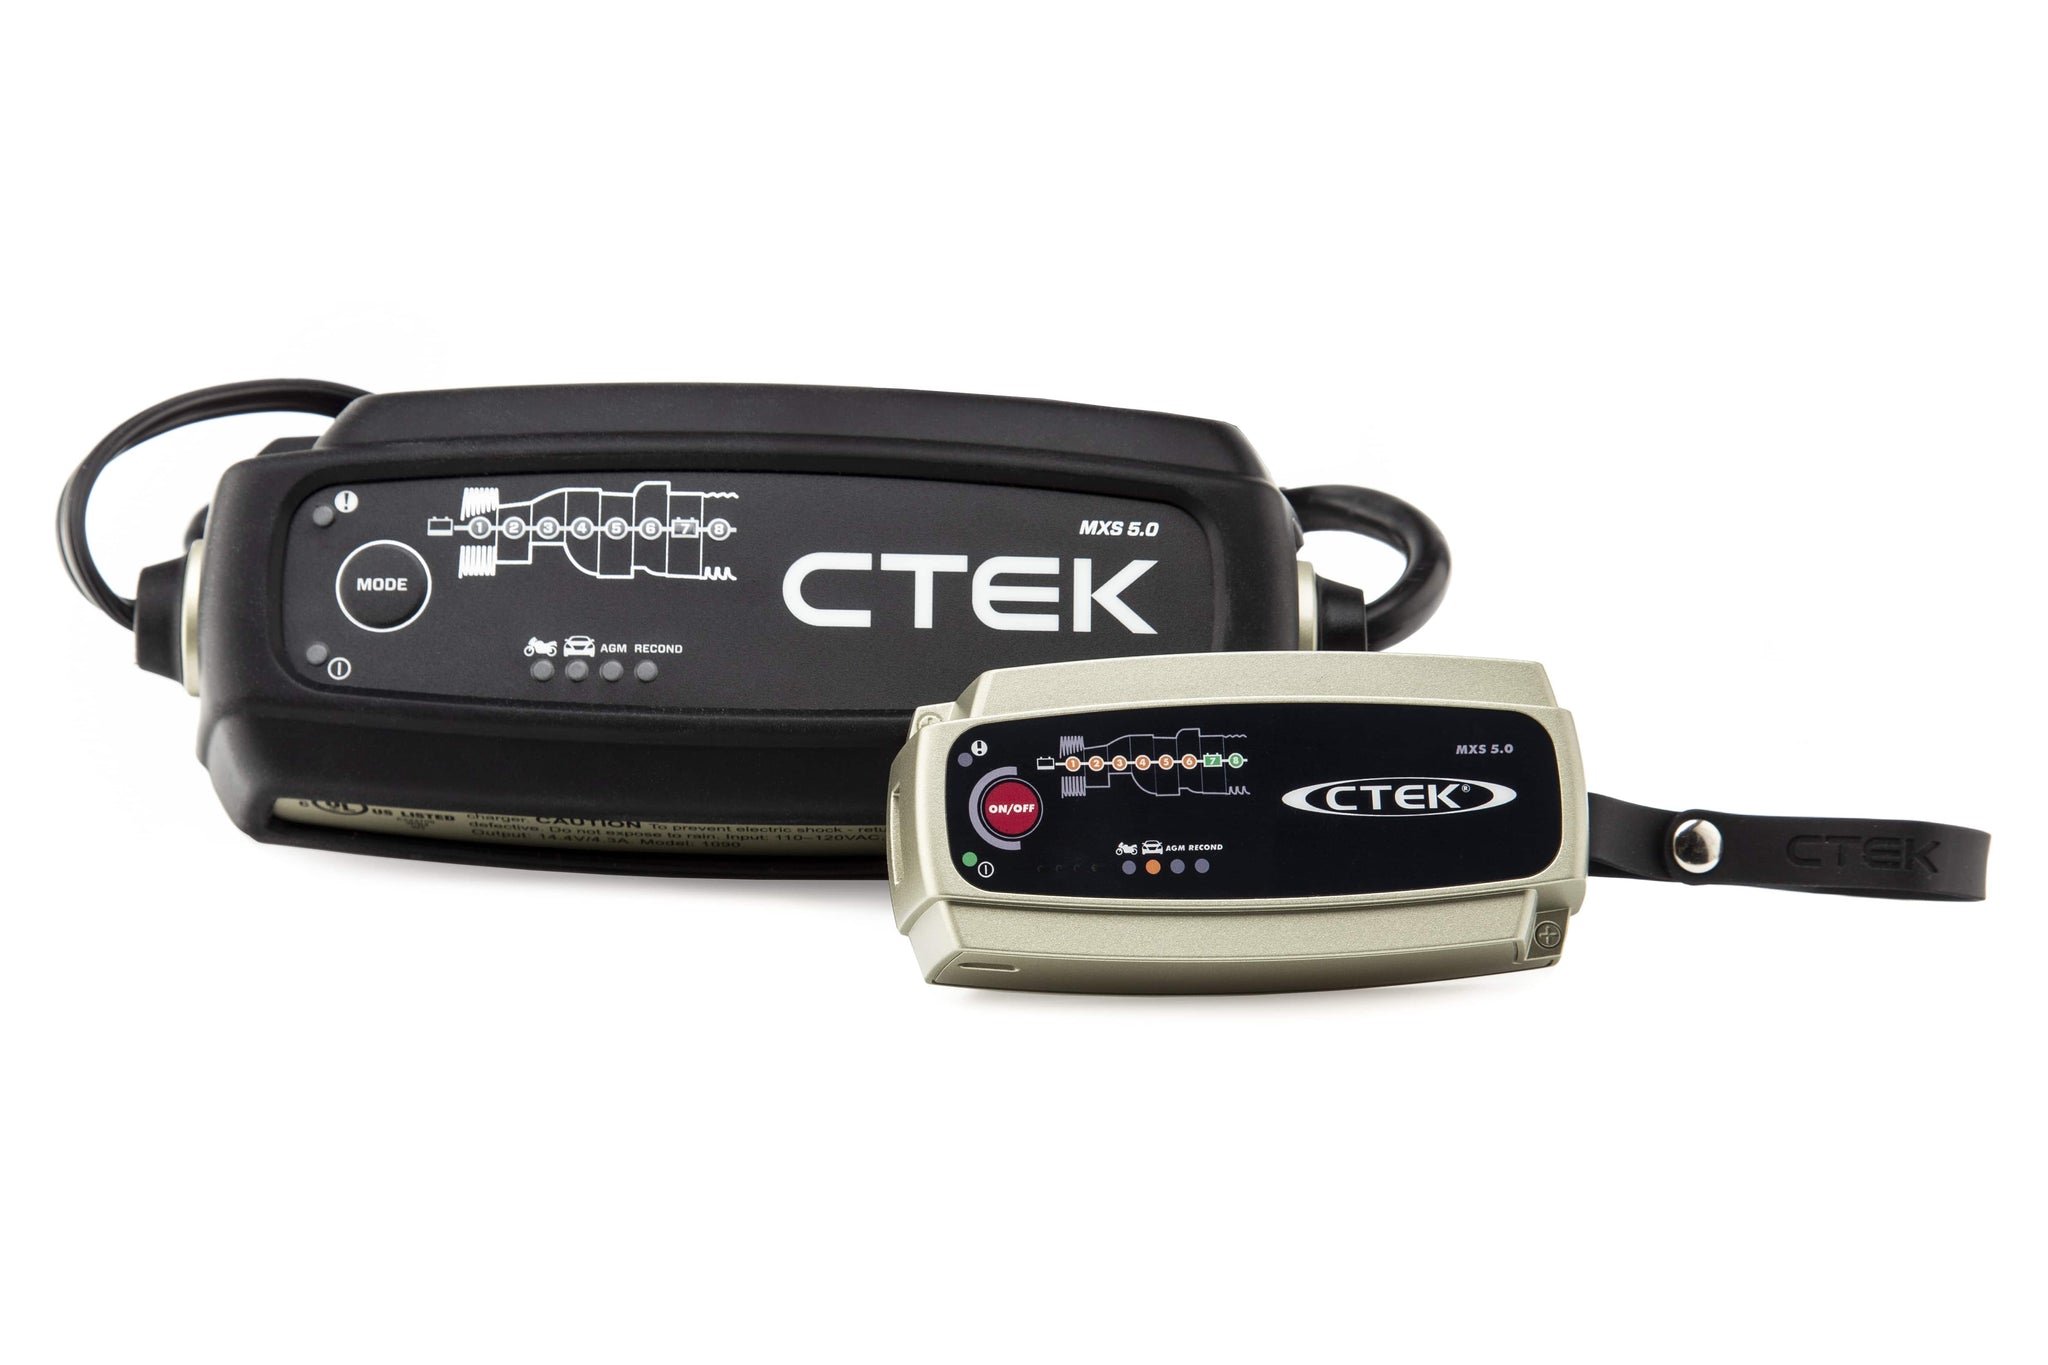 CTEK (40-206) MXS 5.0-12 Volt Battery Charger and Maintainer and Family  Garage Kit